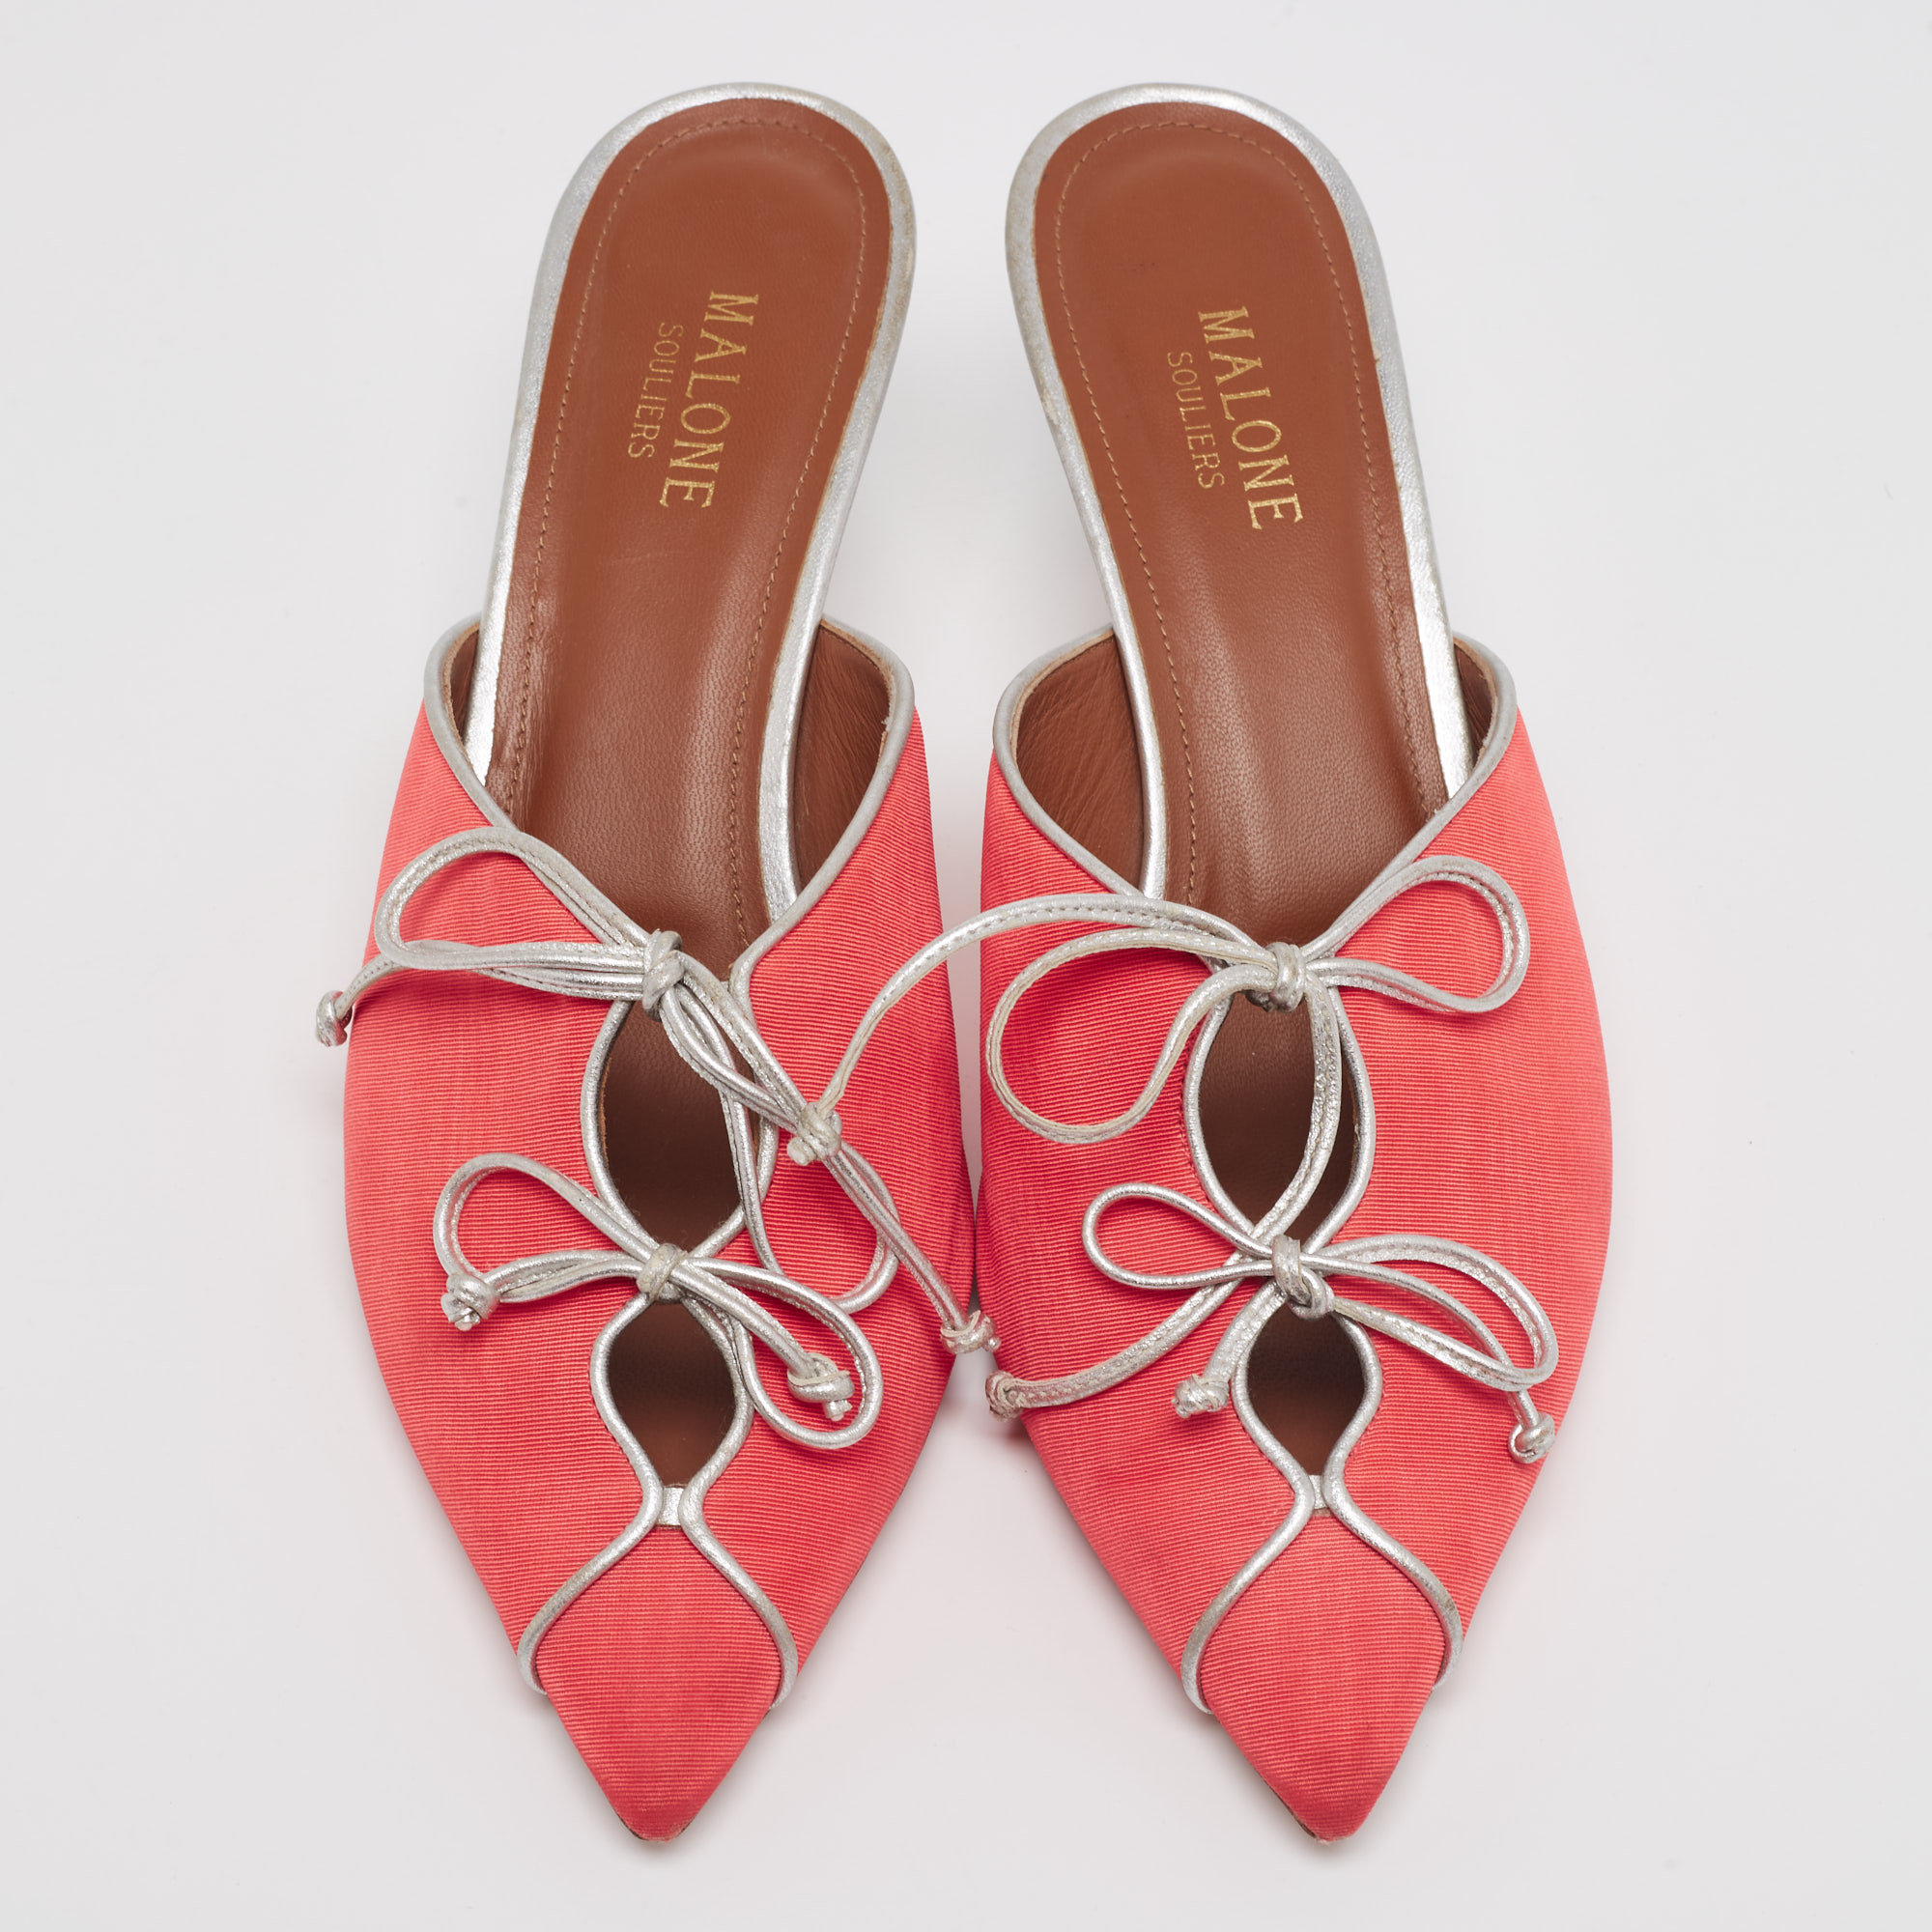 Malone Souliers Pink/Silver Canvas And Leather Maisie Sandals Size 40